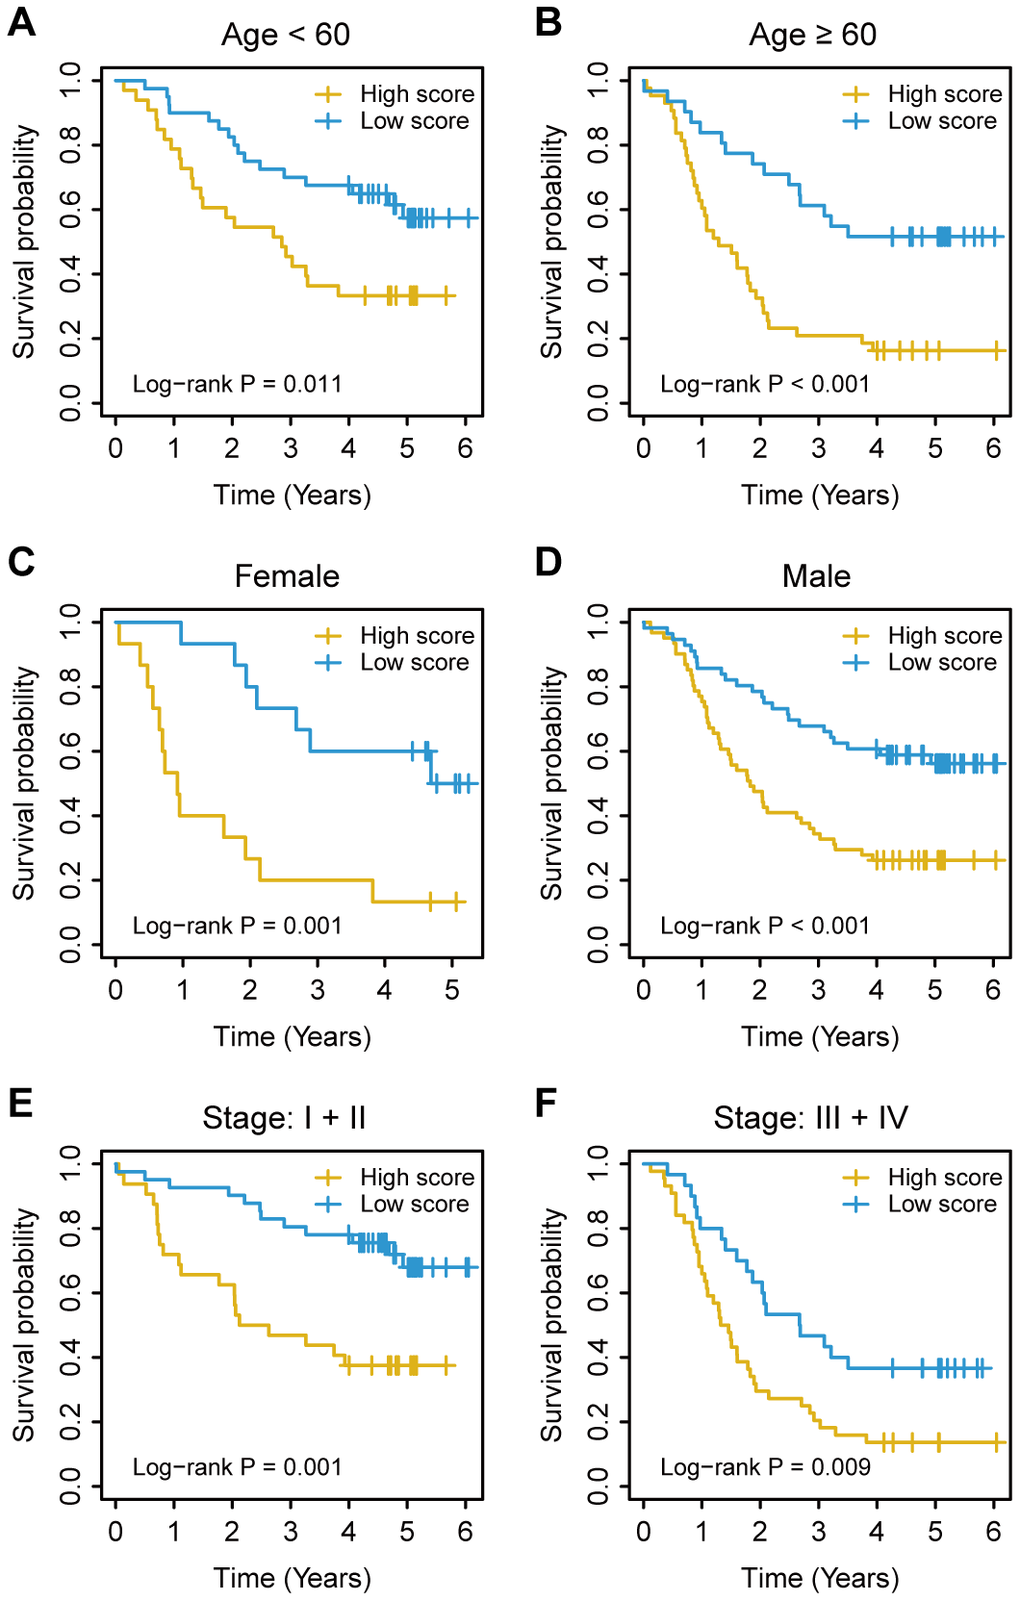 Kaplan–Meier survival analysis based on the immunoscore signature of oesophageal cancer patients in the training cohort stratified based on clinical characteristics. (A, B) Age. (C, D) Sex. (E, F) TNM stage. The log-rank test was performed to calculate P values.